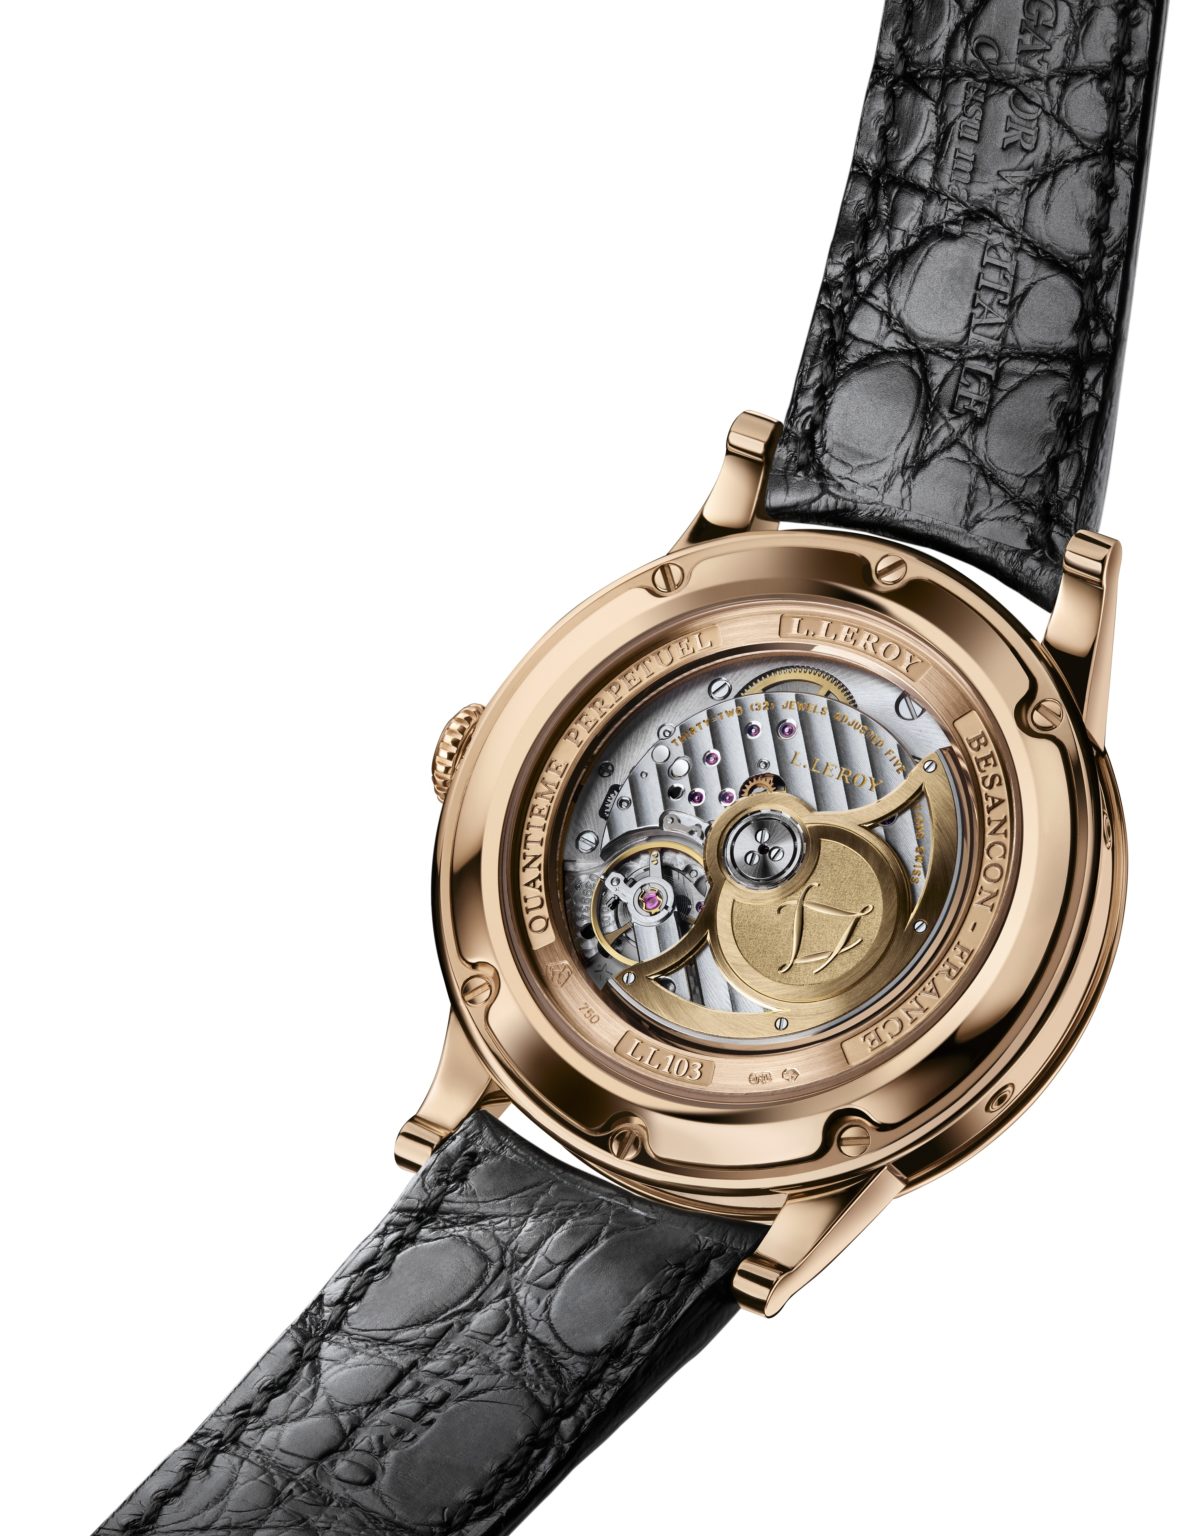 Showing at WatchTime New York 2021: L. Leroy Osmior Retrograde ...